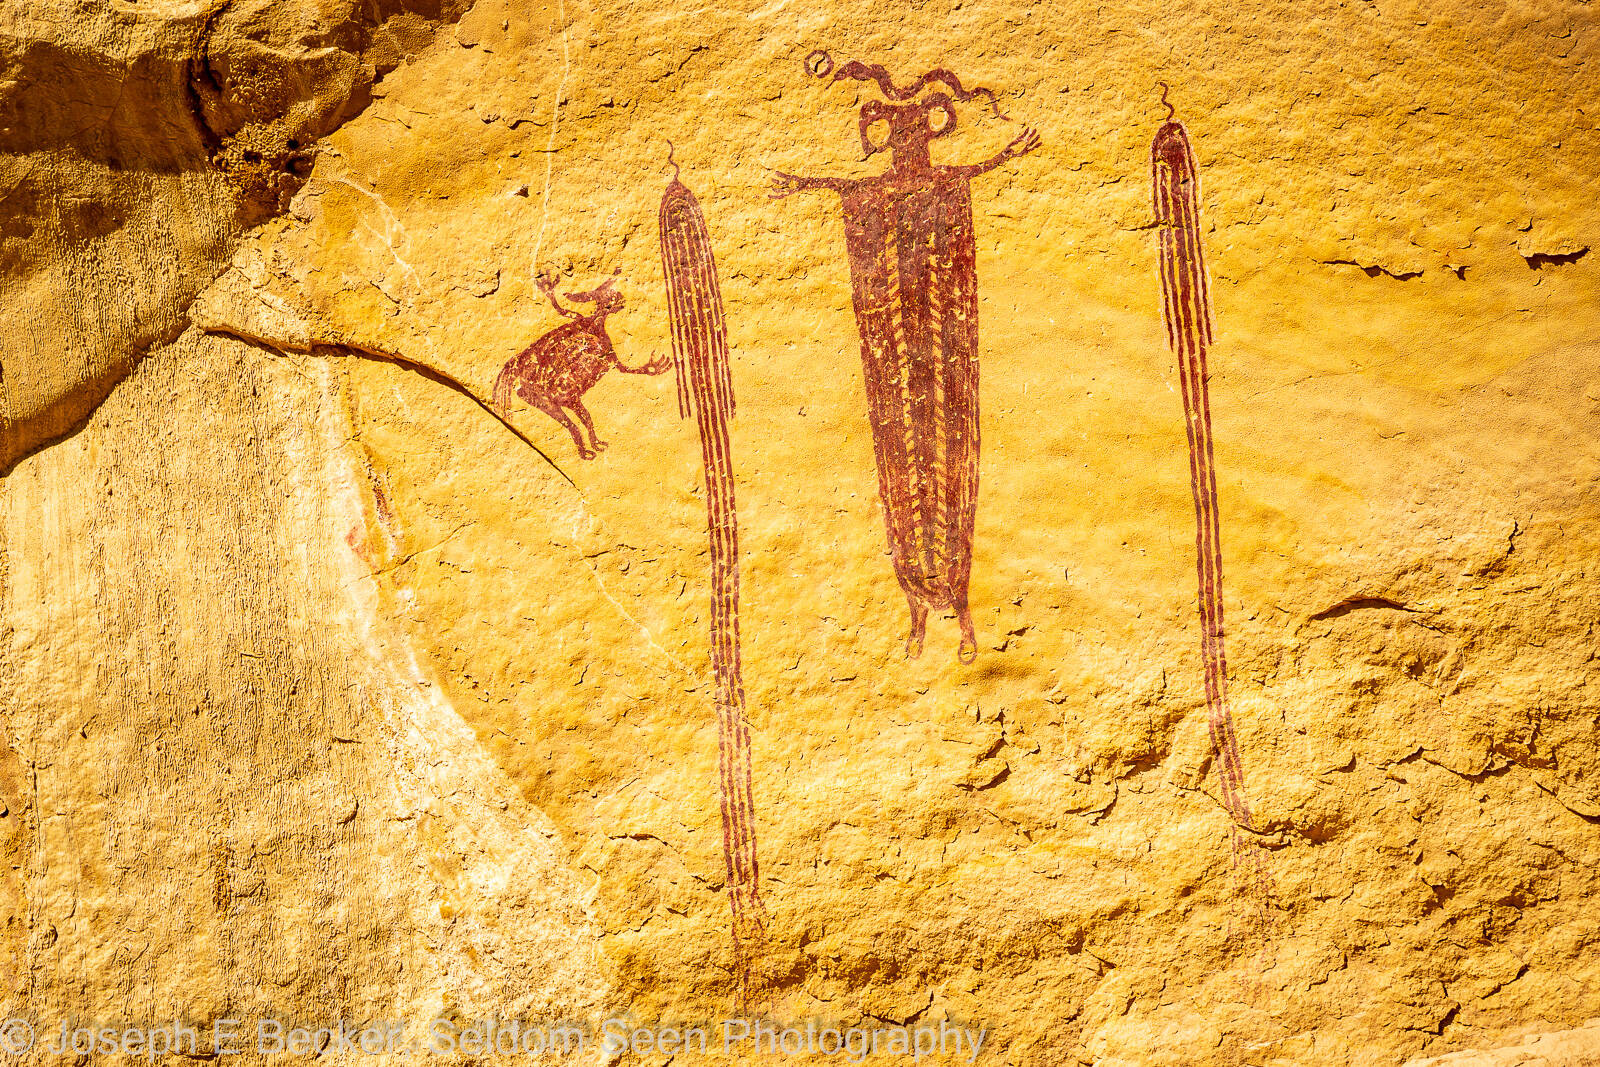 Image of Head of Sinbad Pictograph by Joe Becker